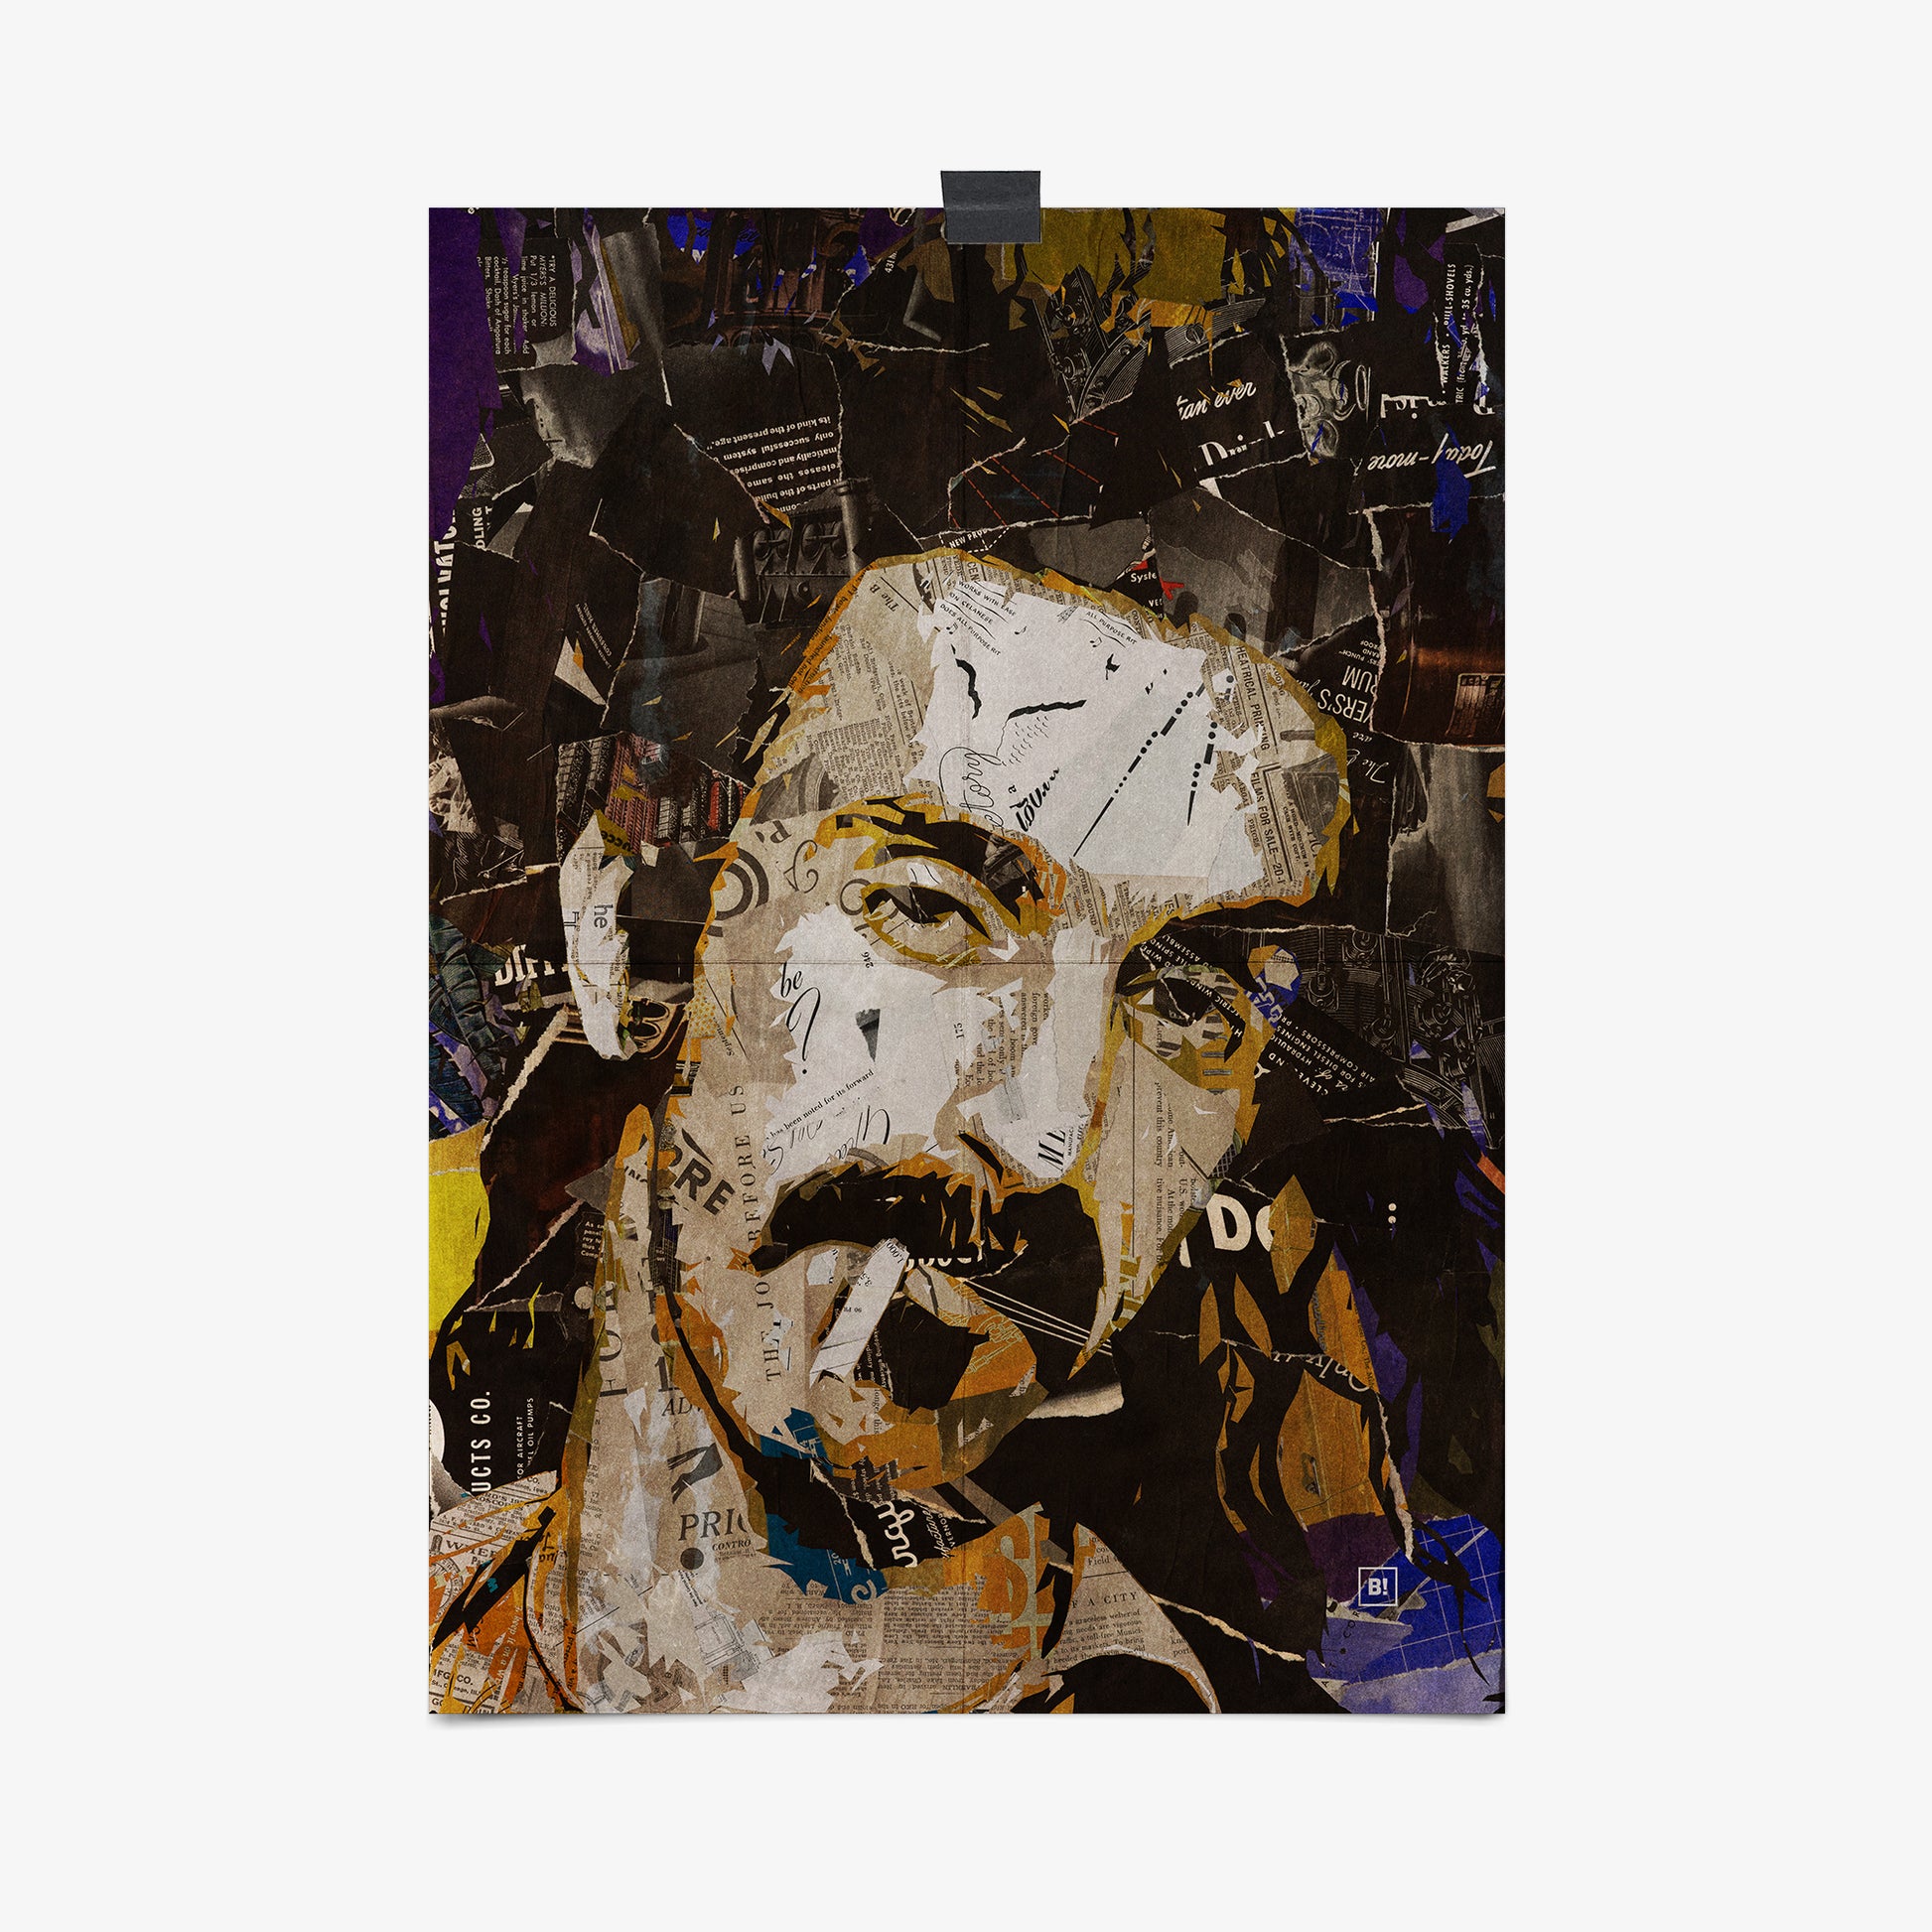 Be inspired by our iconic collage portrait art print of Frank Zappa. This artwork was printed using the giclée process on archival acid-free paper, capturing its timeless beauty in every detail.